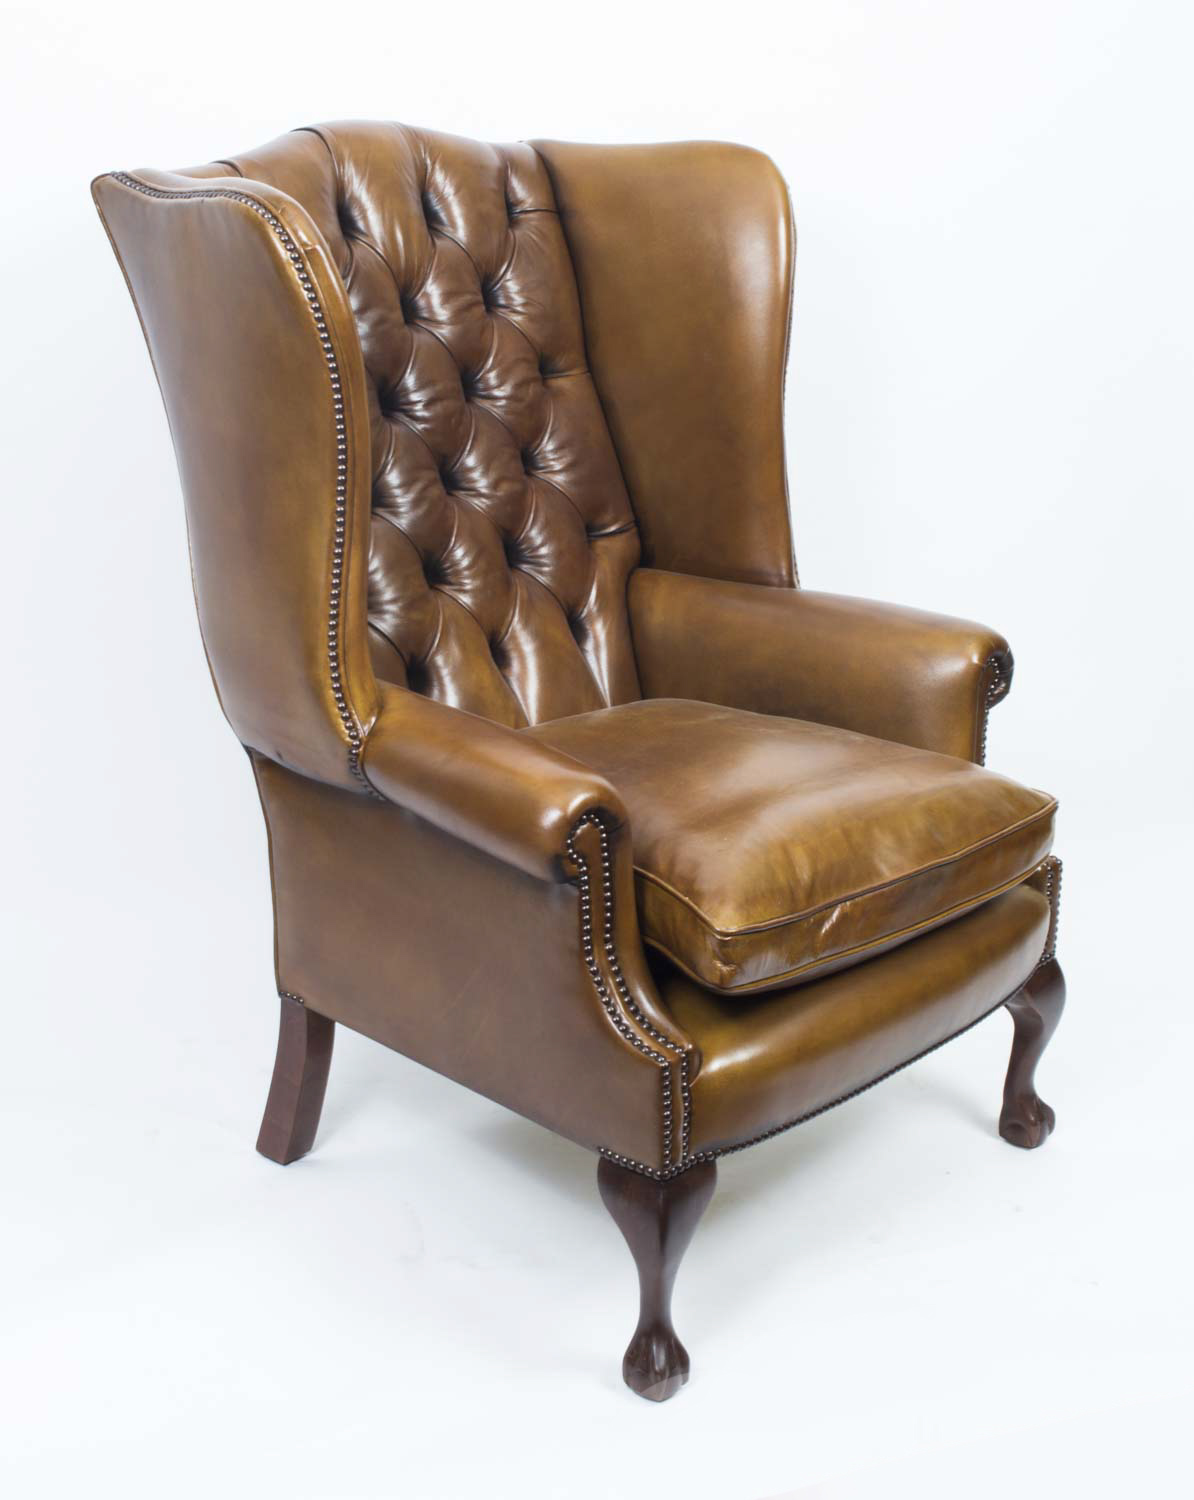 Bespoke Leather Ref No 06566d, Wingback Chairs Leather